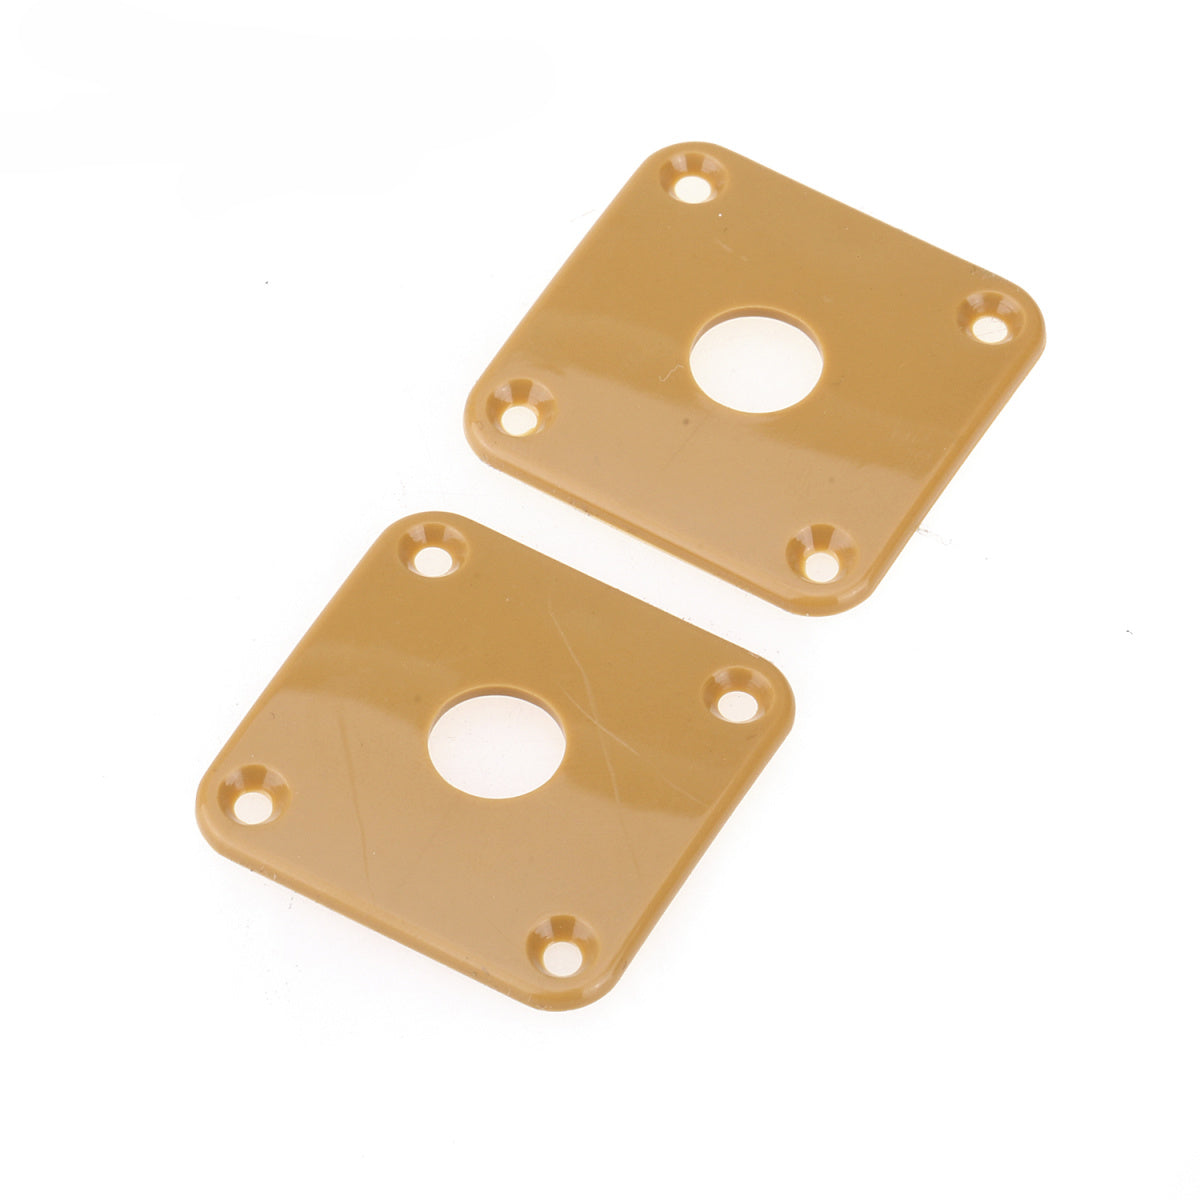 Musiclily Pro Plastic Curved Jack Plate Square  Jackplates for Gibson Epiphone Les Paul Guitar, Brown Cream(Set of 2)